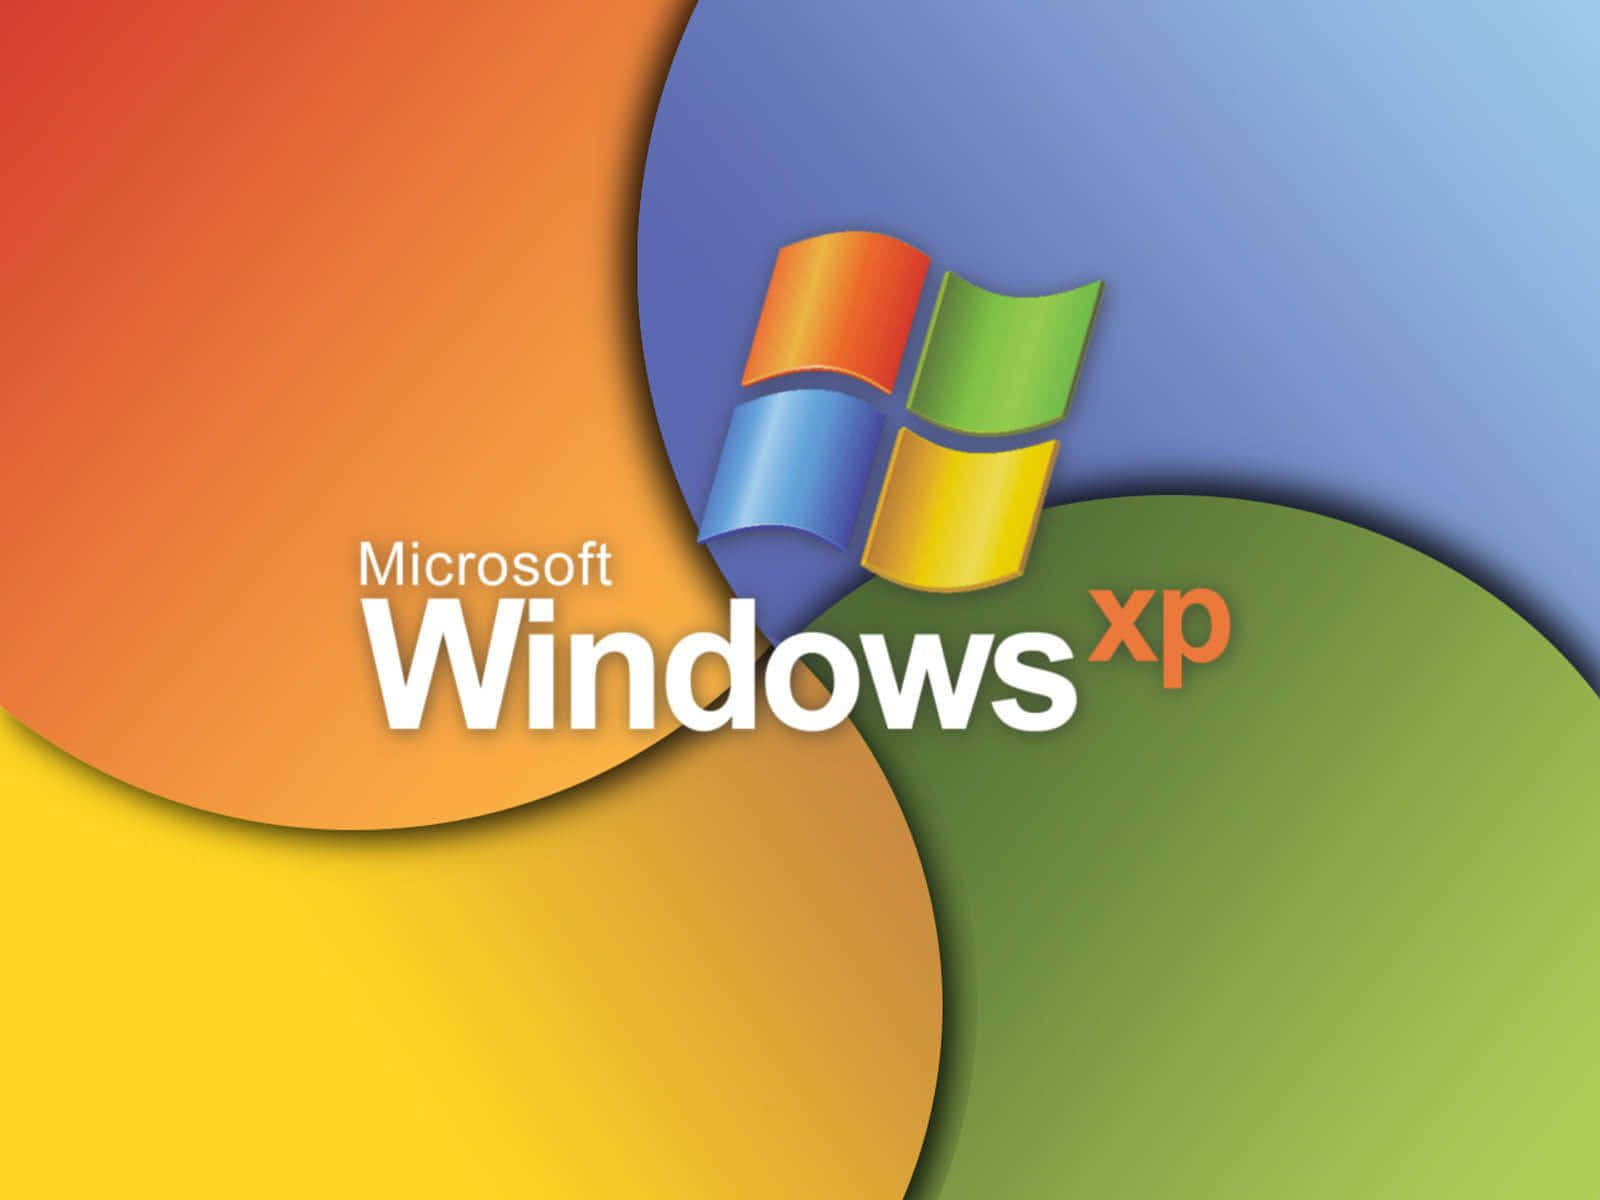 Stay connected with your world using Windows XP